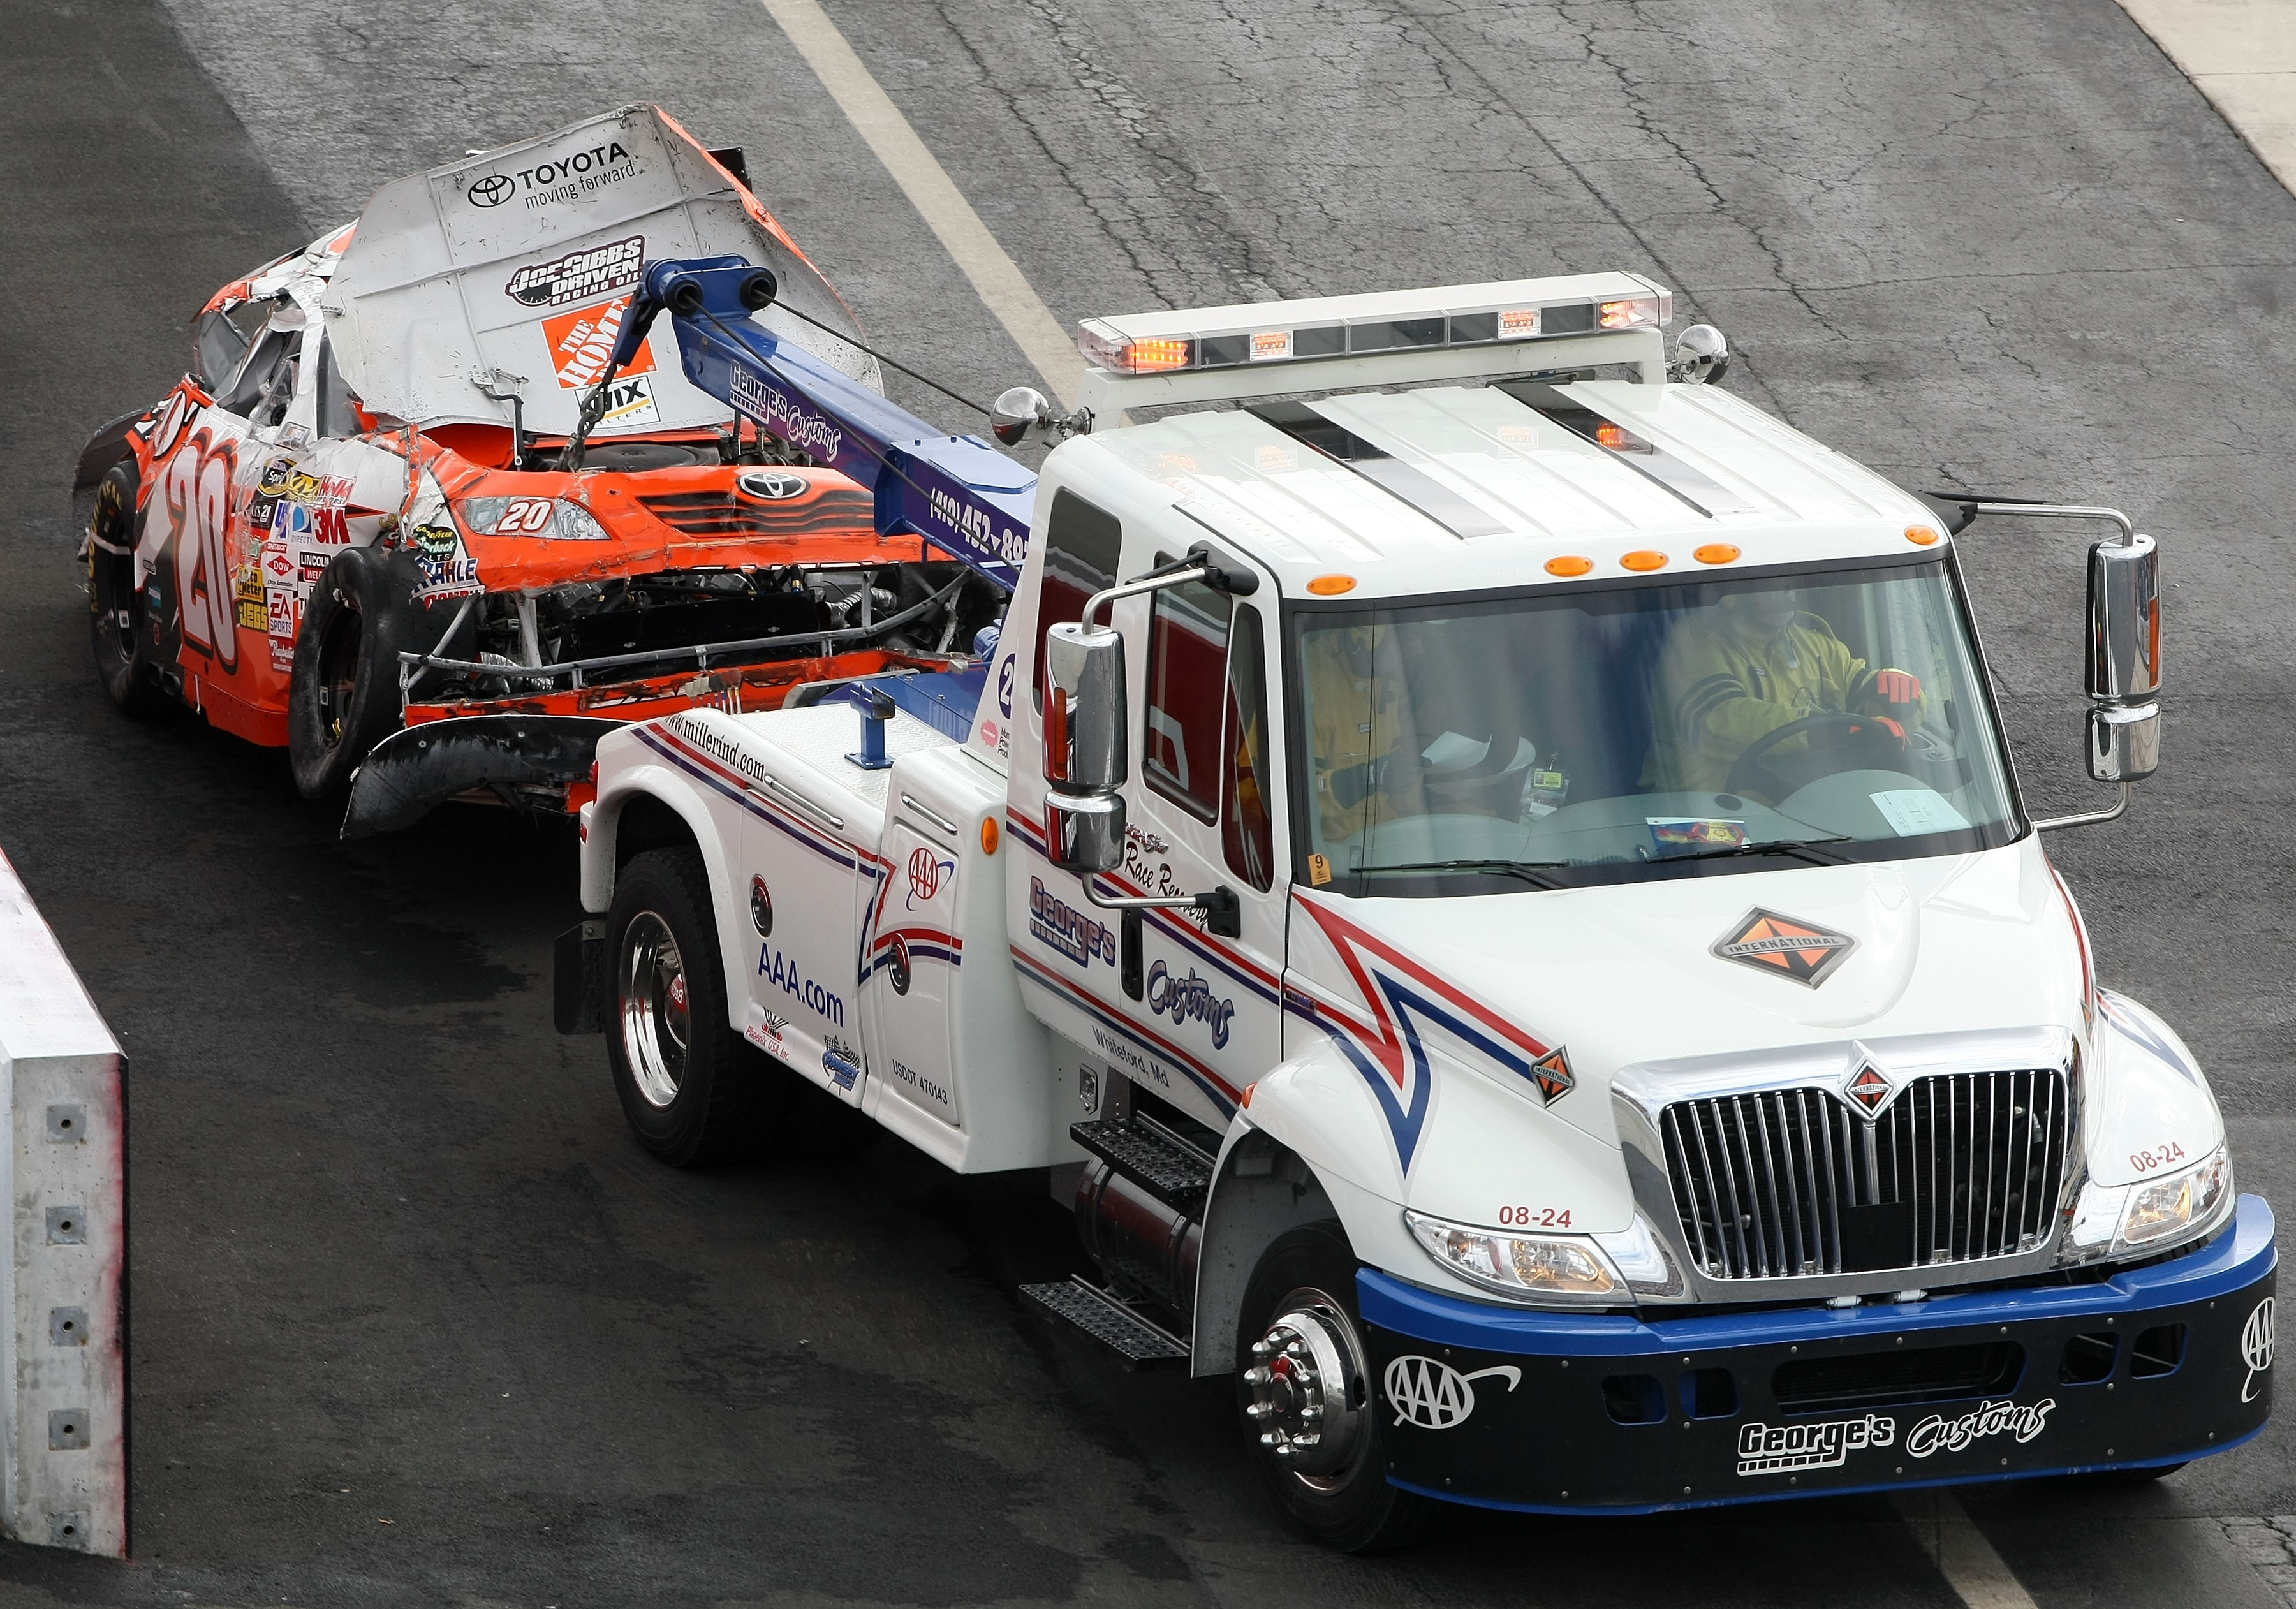 DOVER, DE - SEPTEMBER 27:  A tow truck removes, Joey Logano's heavily damaged #20 Home Depot Chevrolet, off the track after it was involved in a wreck during the NASCAR Sprint Cup Series AAA 400 at Dover International Speedway on September 27, 2009 in Dov